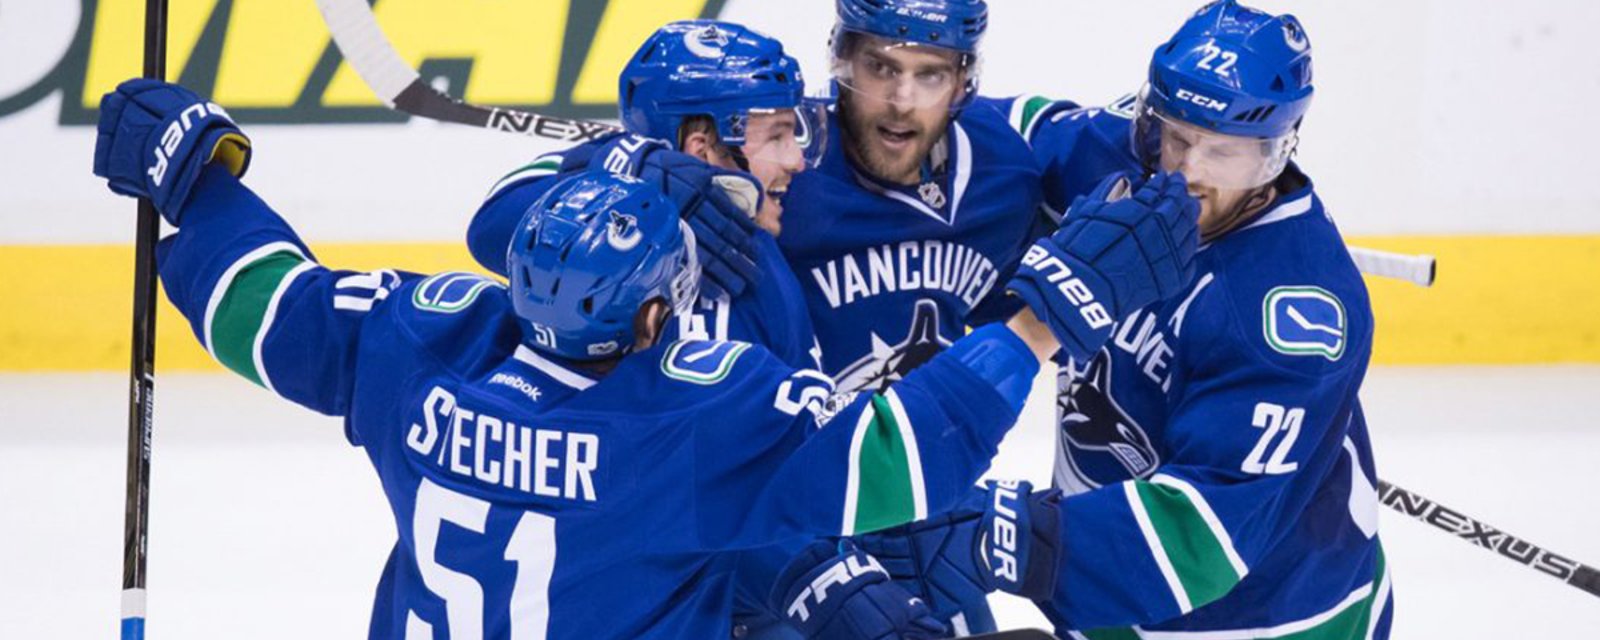 Injury Report: Finally some good news for the Canucks